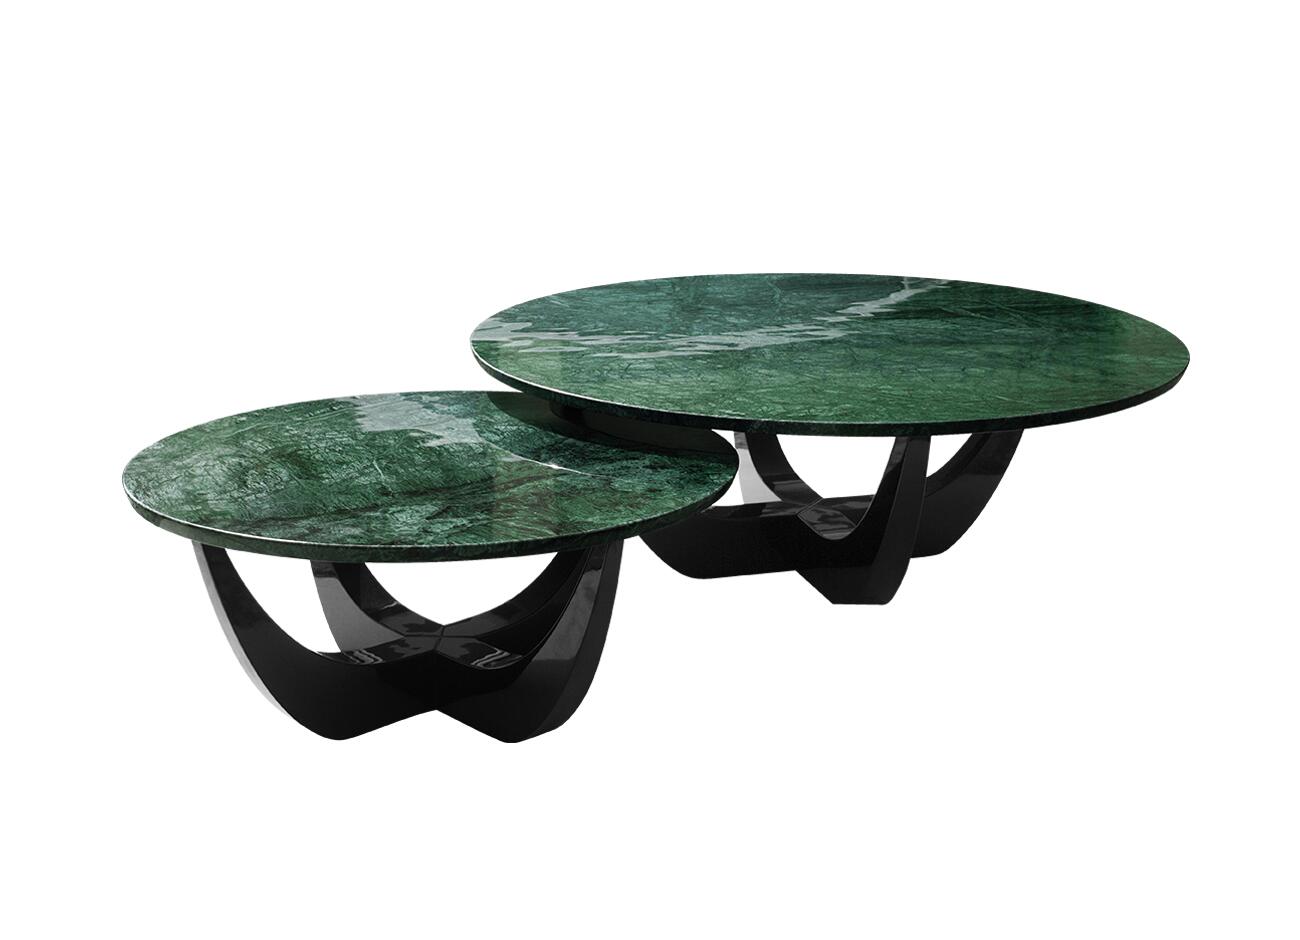 Canopy center table